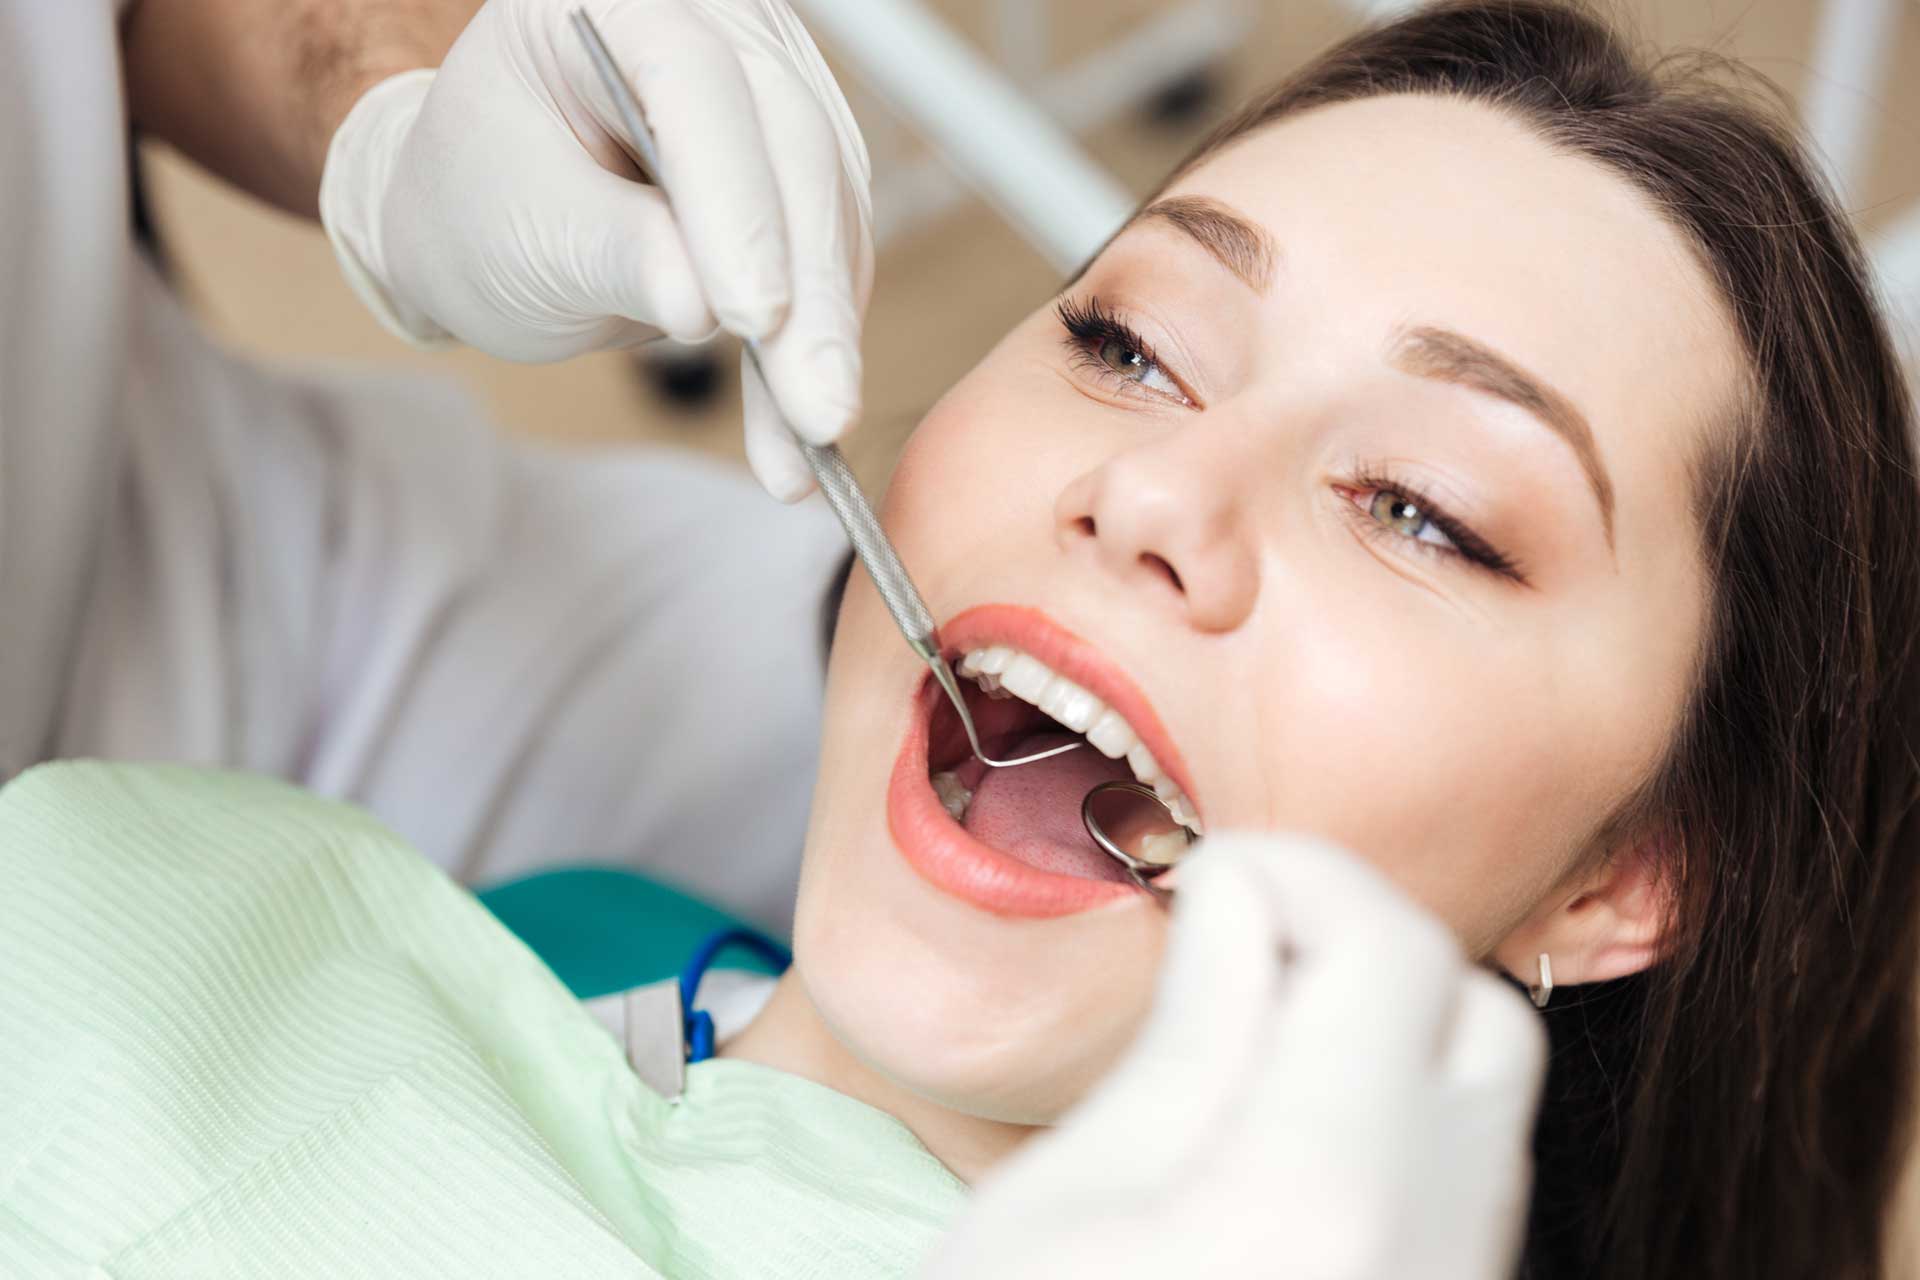 root canal services dentistry phoenix glendale dentist